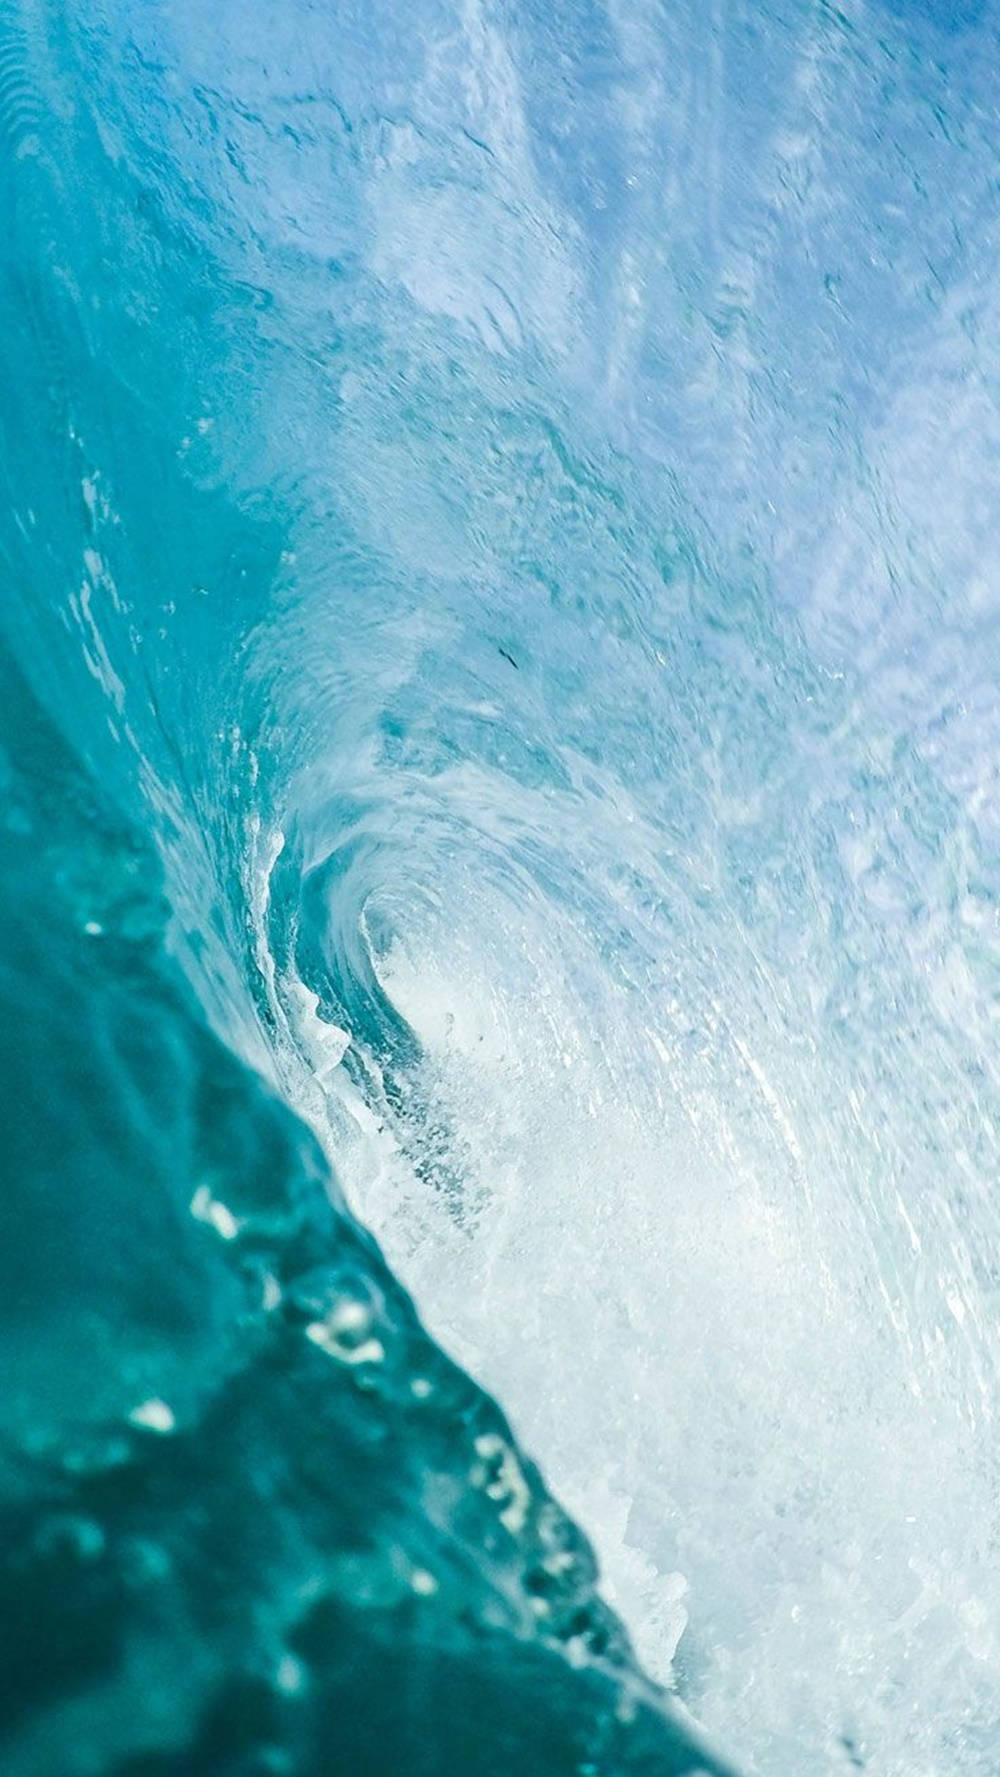 Soak In The Beauty Of The Ocean With The Latest Iphone Background